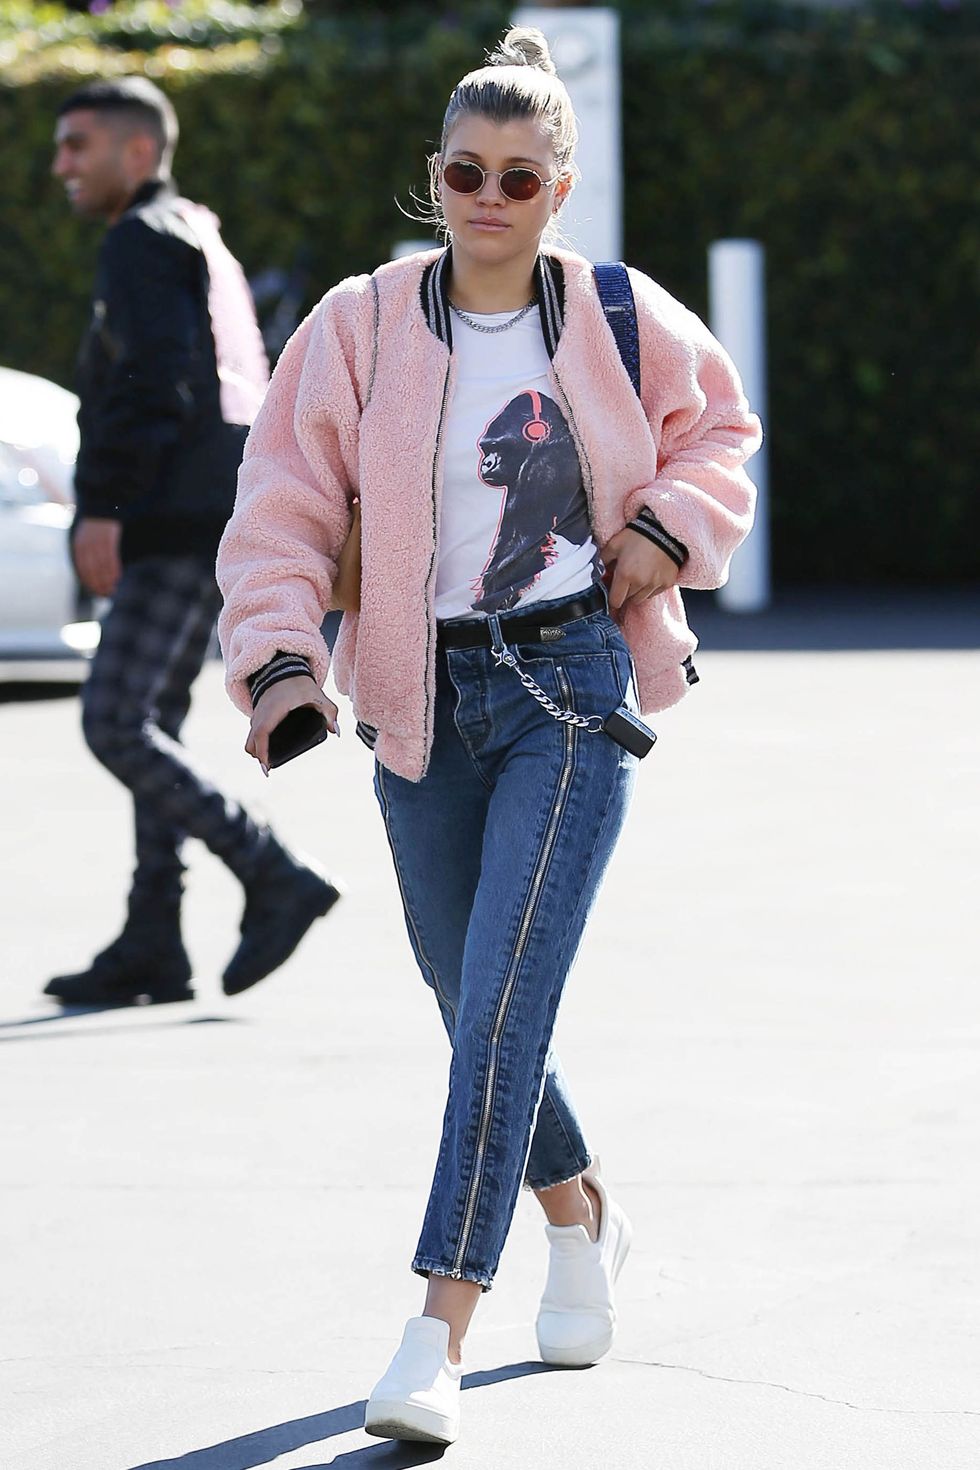 <p>A Los Angeles <strong data-redactor-tag="strong" data-verified="redactor">Sofia&nbsp;Richie</strong> sceglie un bomber rosa&nbsp;blush, t-shirt grafica,&nbsp;jeans e <strong data-redactor-tag="strong" data-verified="redactor">scarpe da ginnastica </strong>bianche.<span class="redactor-invisible-space" data-verified="redactor" data-redactor-tag="span" data-redactor-class="redactor-invisible-space"></span></p>